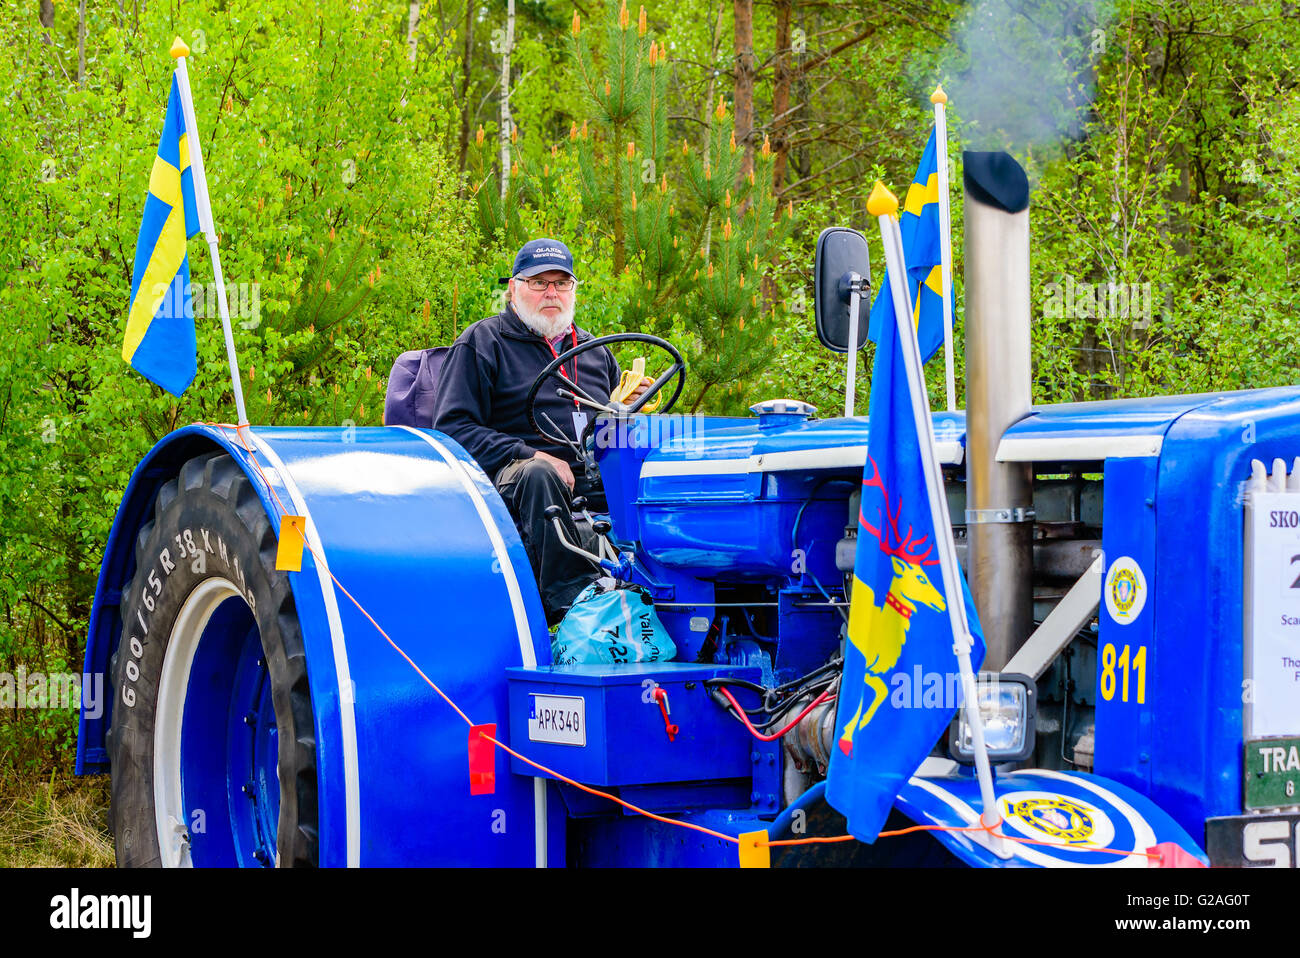 Emmaboda, Sweden - May 14, 2016: Forest and tractor (Skog och traktor) fair. Driver eating a banana while starting the engine of Stock Photo